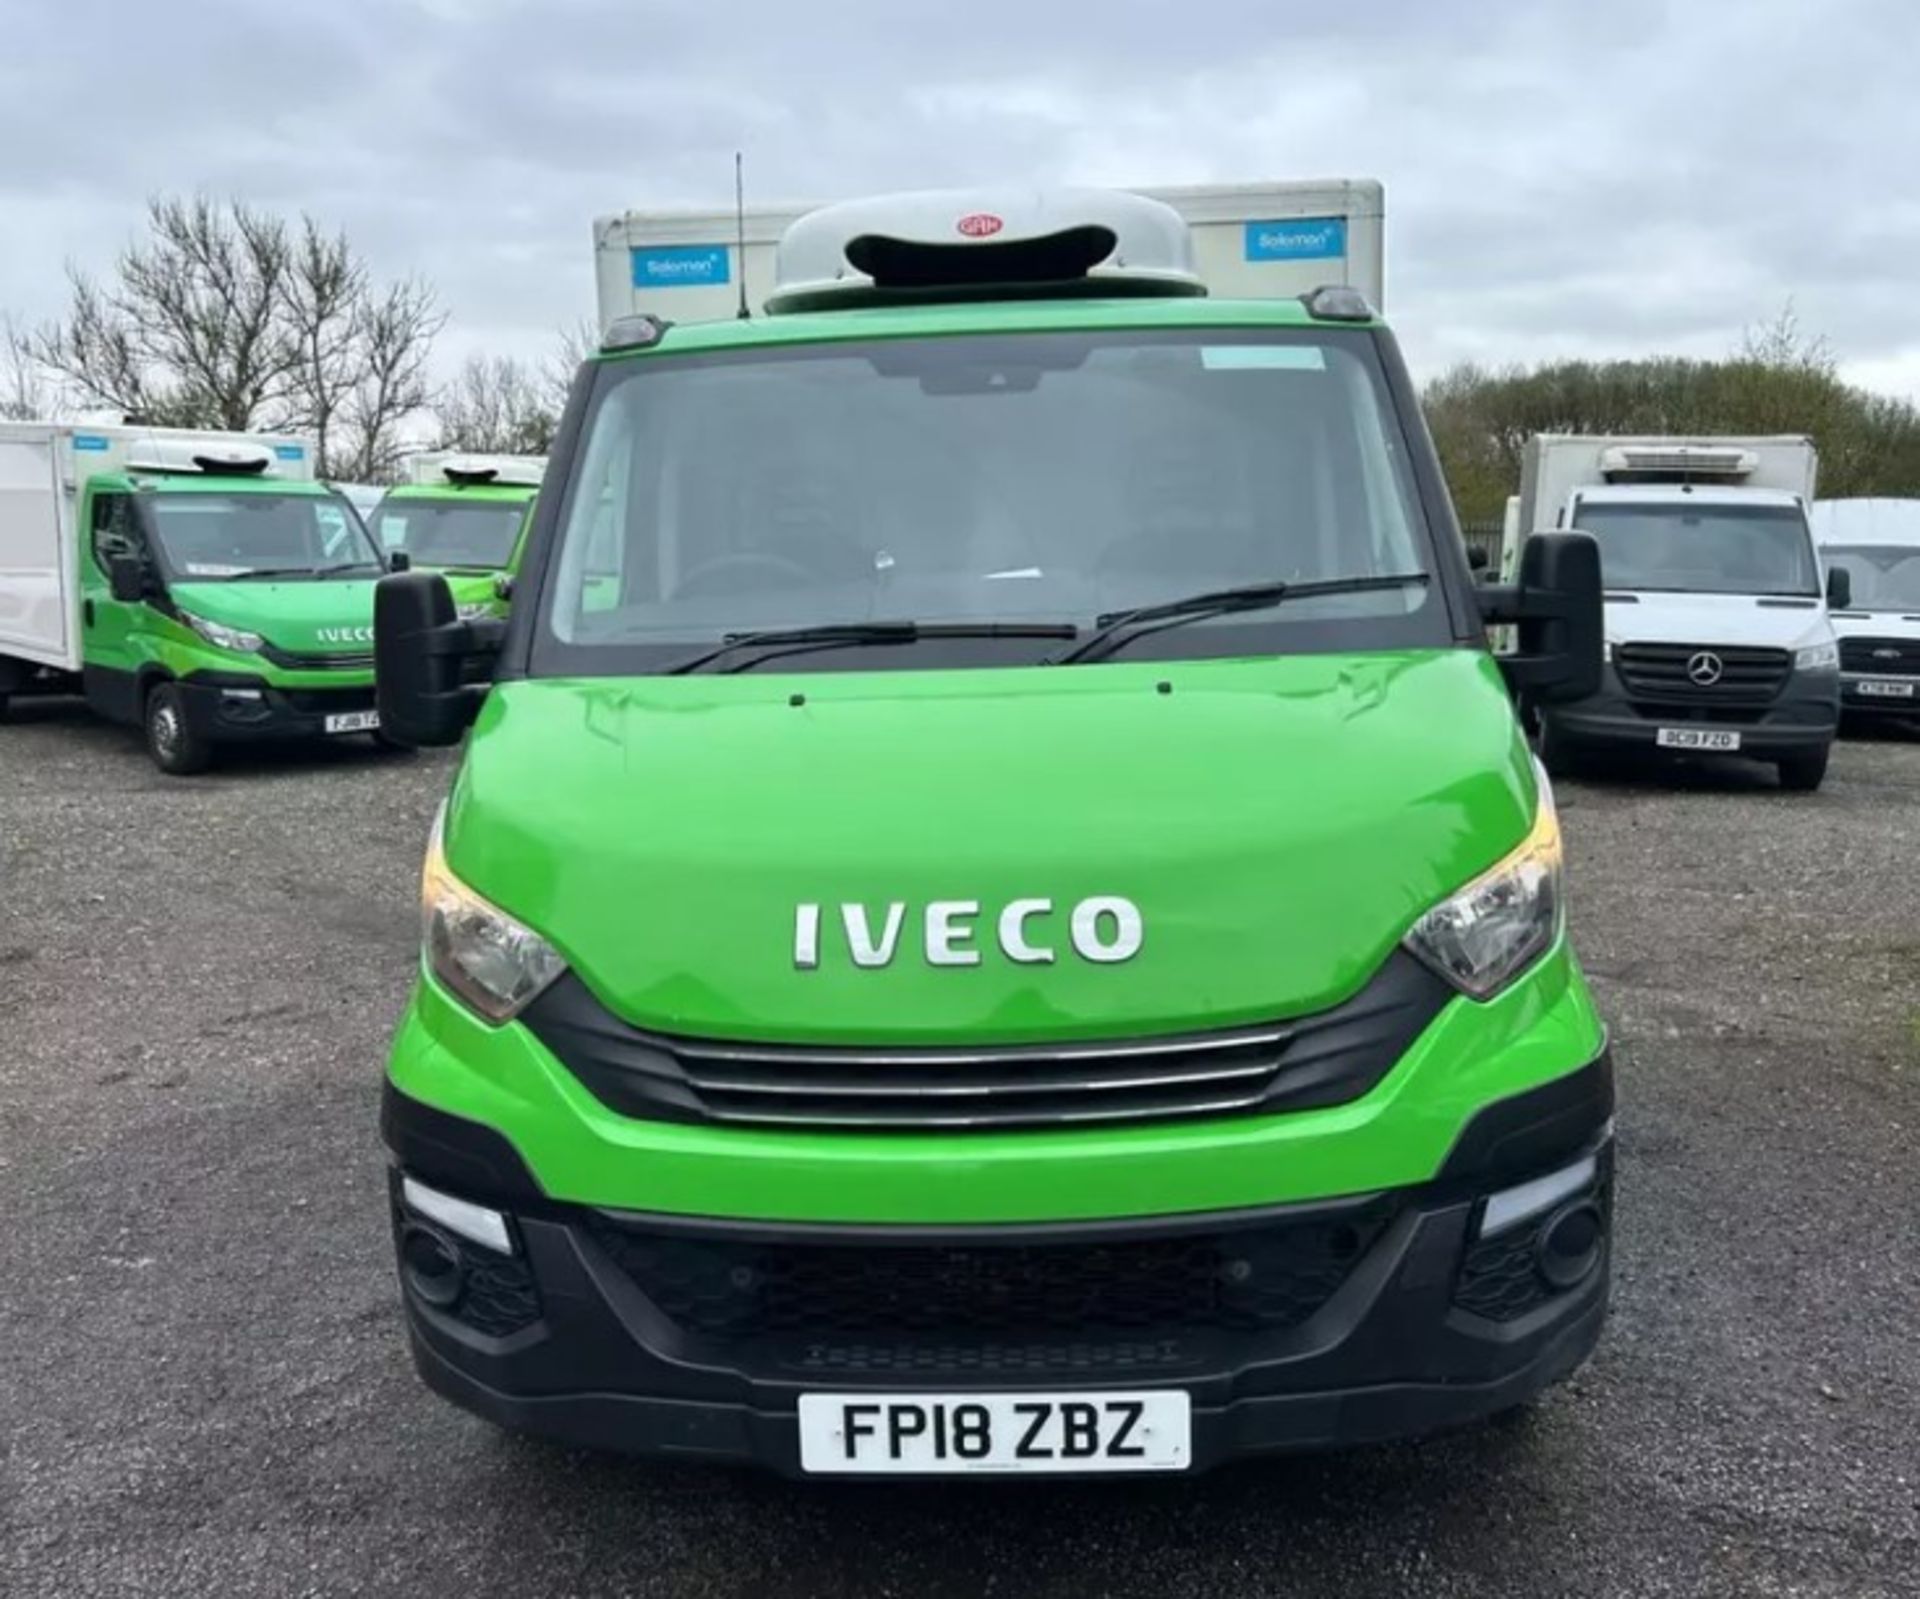 >>>SPECIAL CLEARANCE<<< EXCEPTIONAL PERFORMANCE AND VERSATILITY: 2018 IVECO DAILY 35S12 CHASSIS CAB - Image 2 of 10